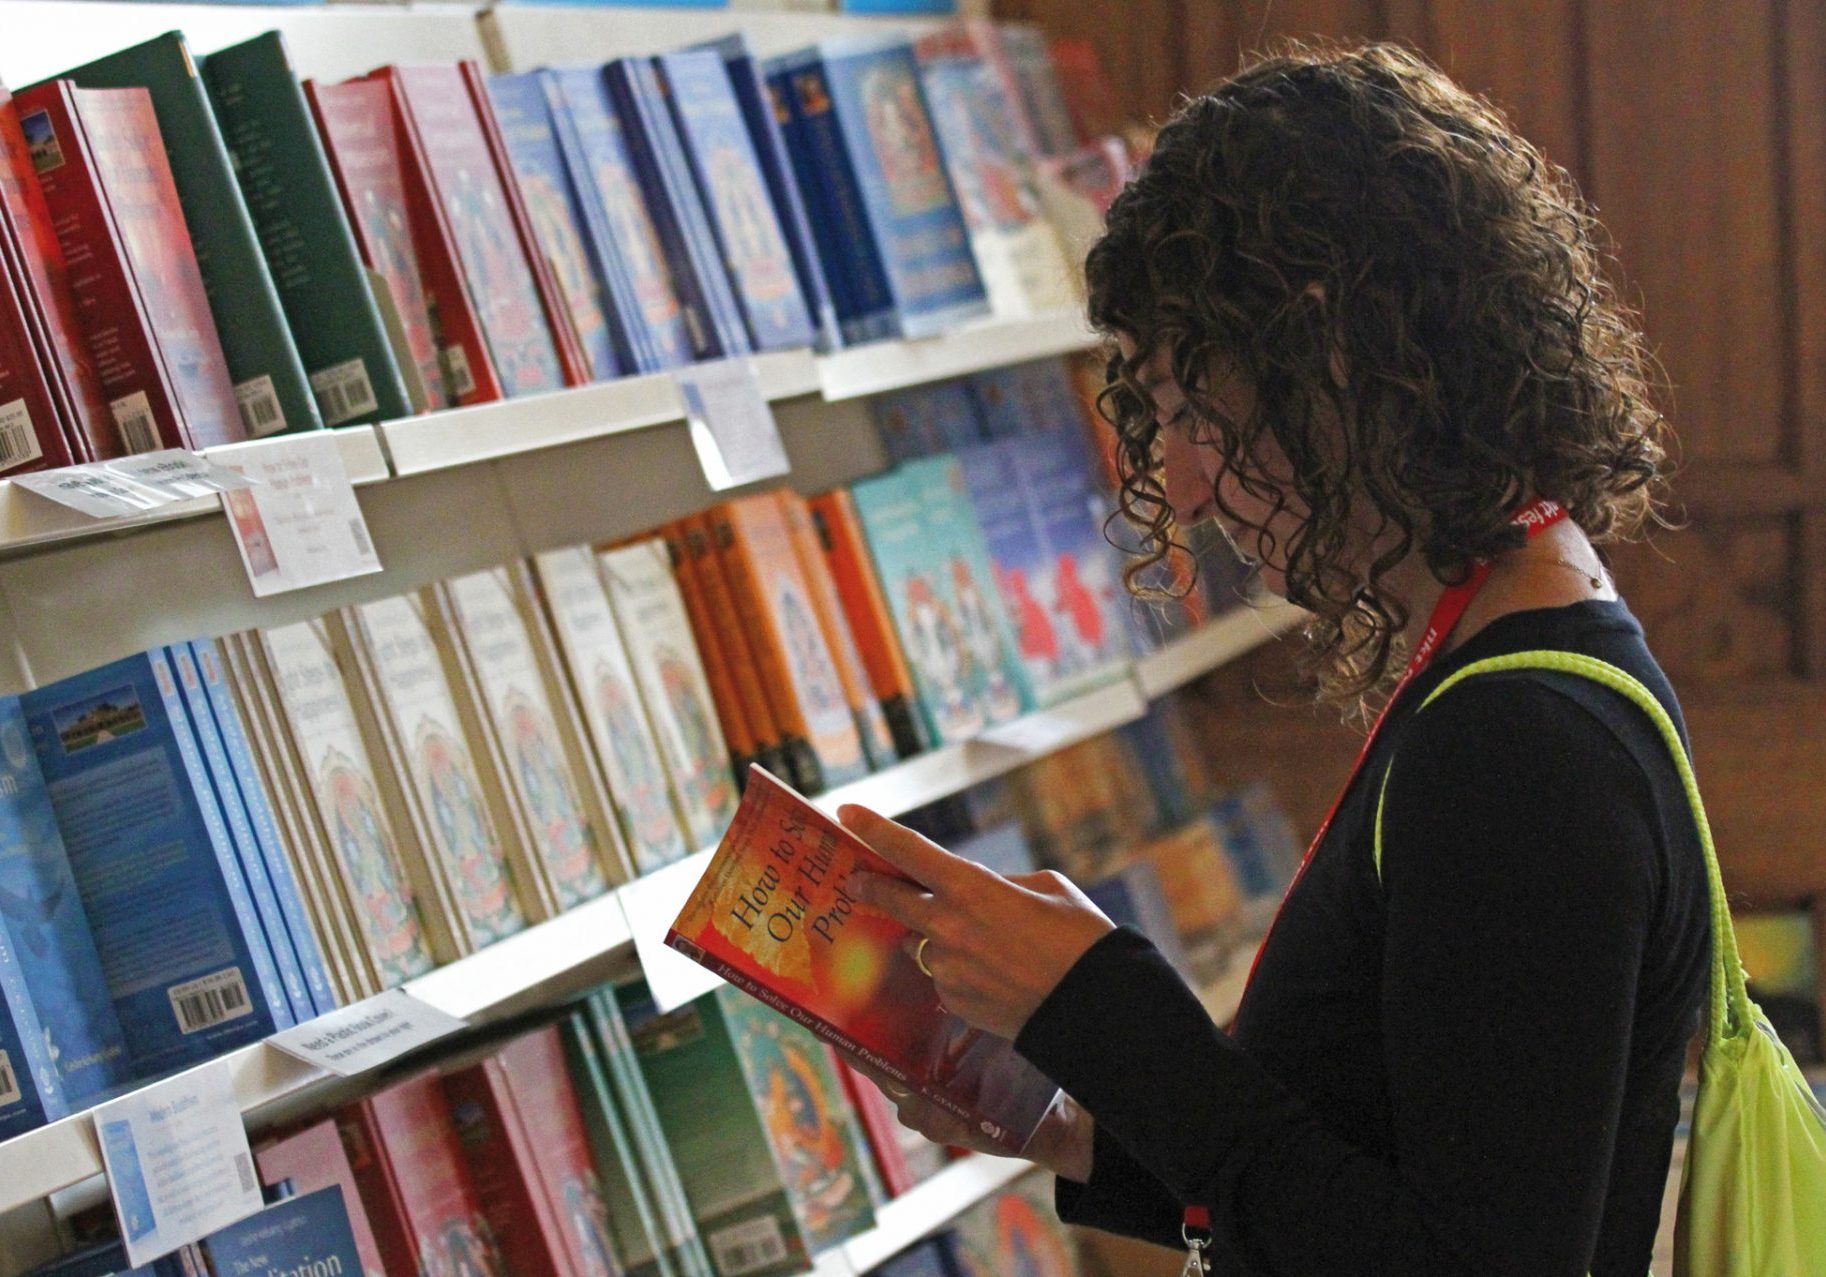 A person reading the books in the bookstore and gift shop.